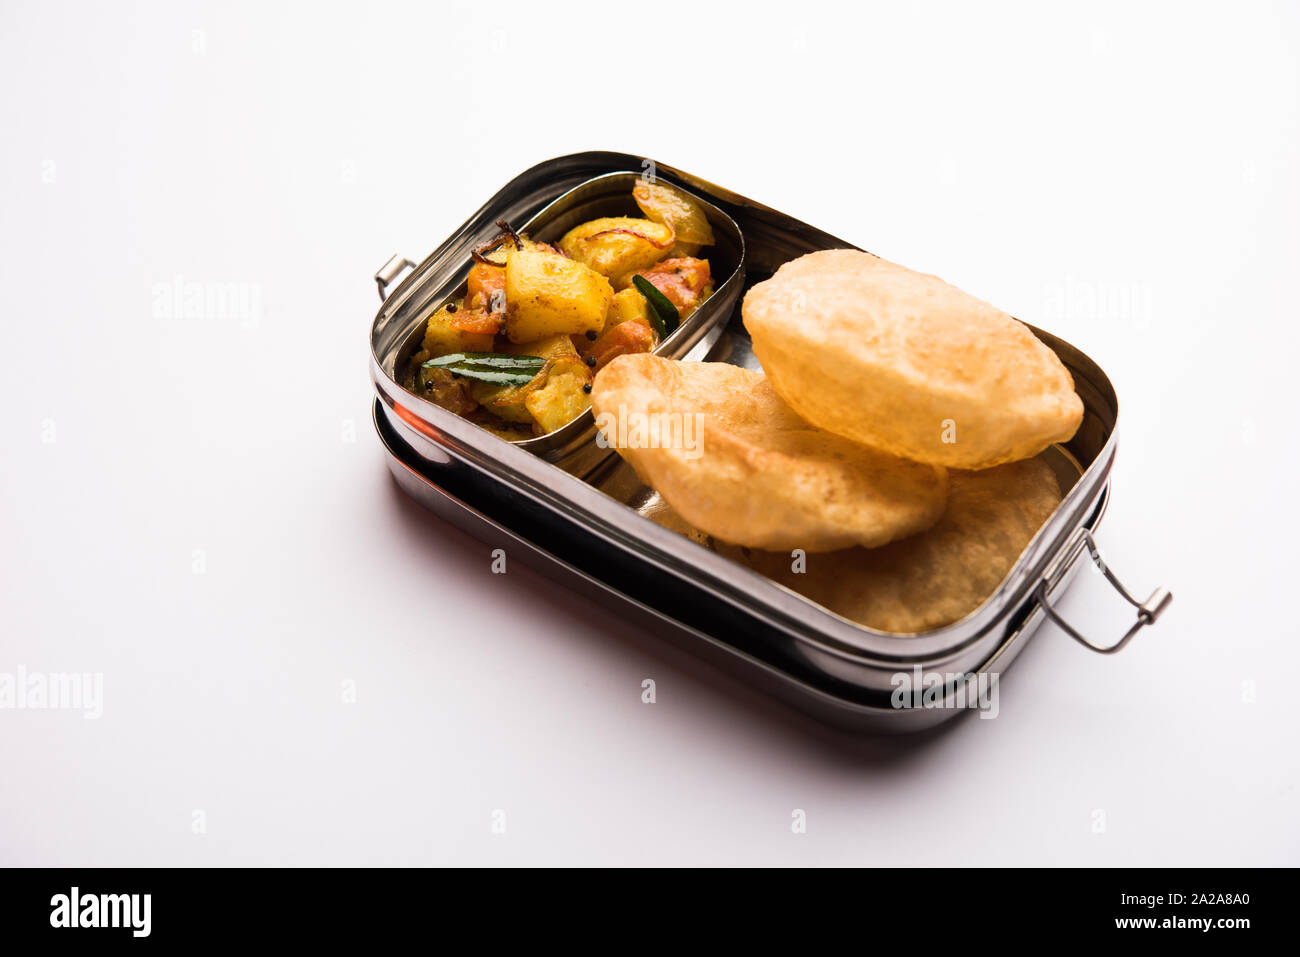 Indian Made Hot Box For Food Storage Stock Photo, Picture and Royalty Free  Image. Image 129500303.